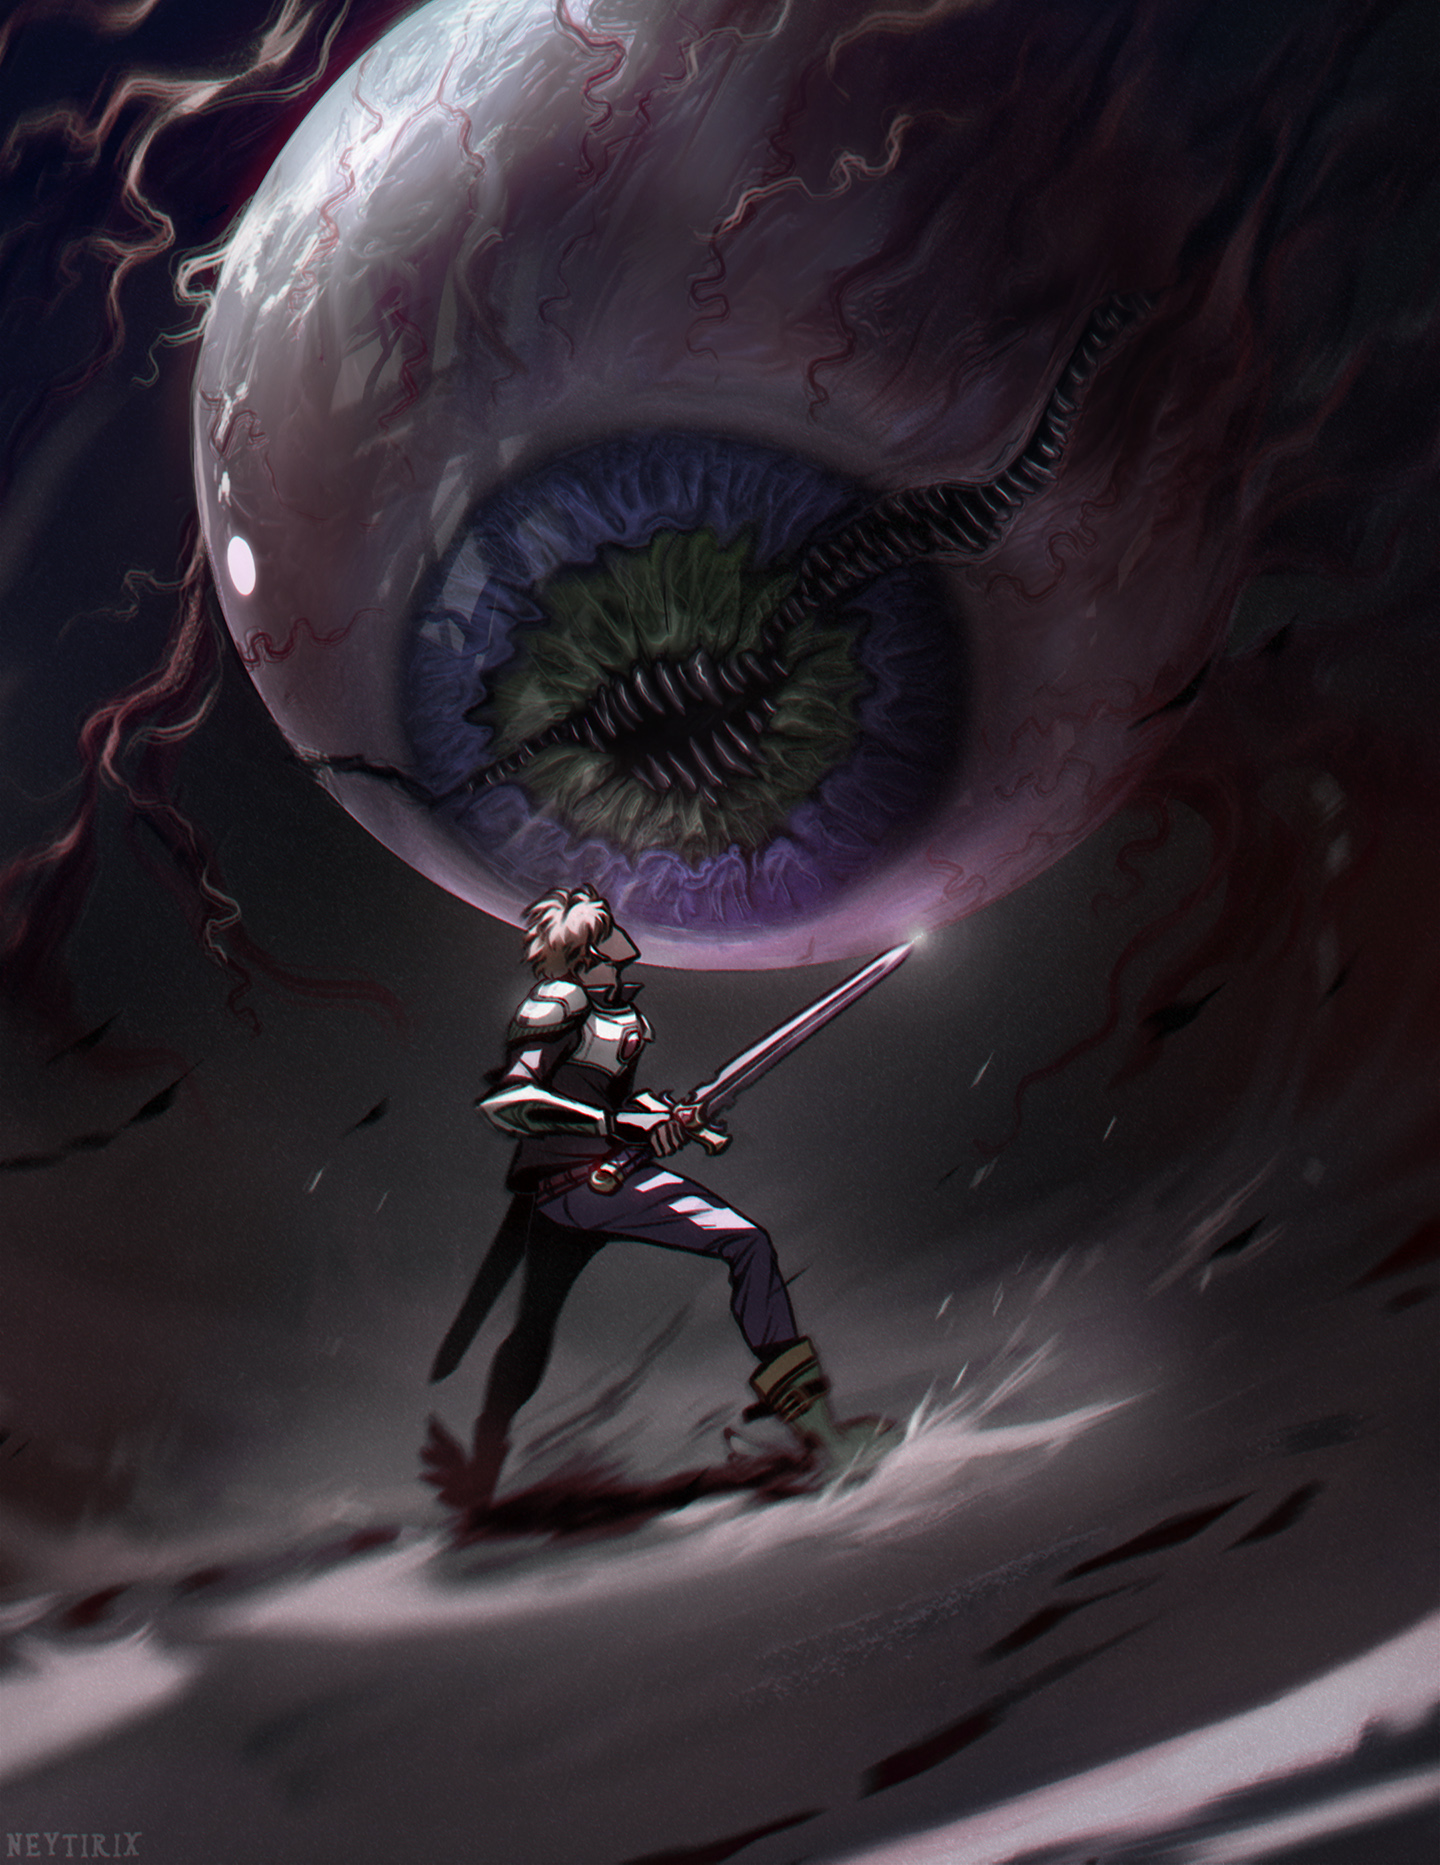 I See you Fanart of Pewdiepie battling The Eye of Cthulhu in his Terraria s...